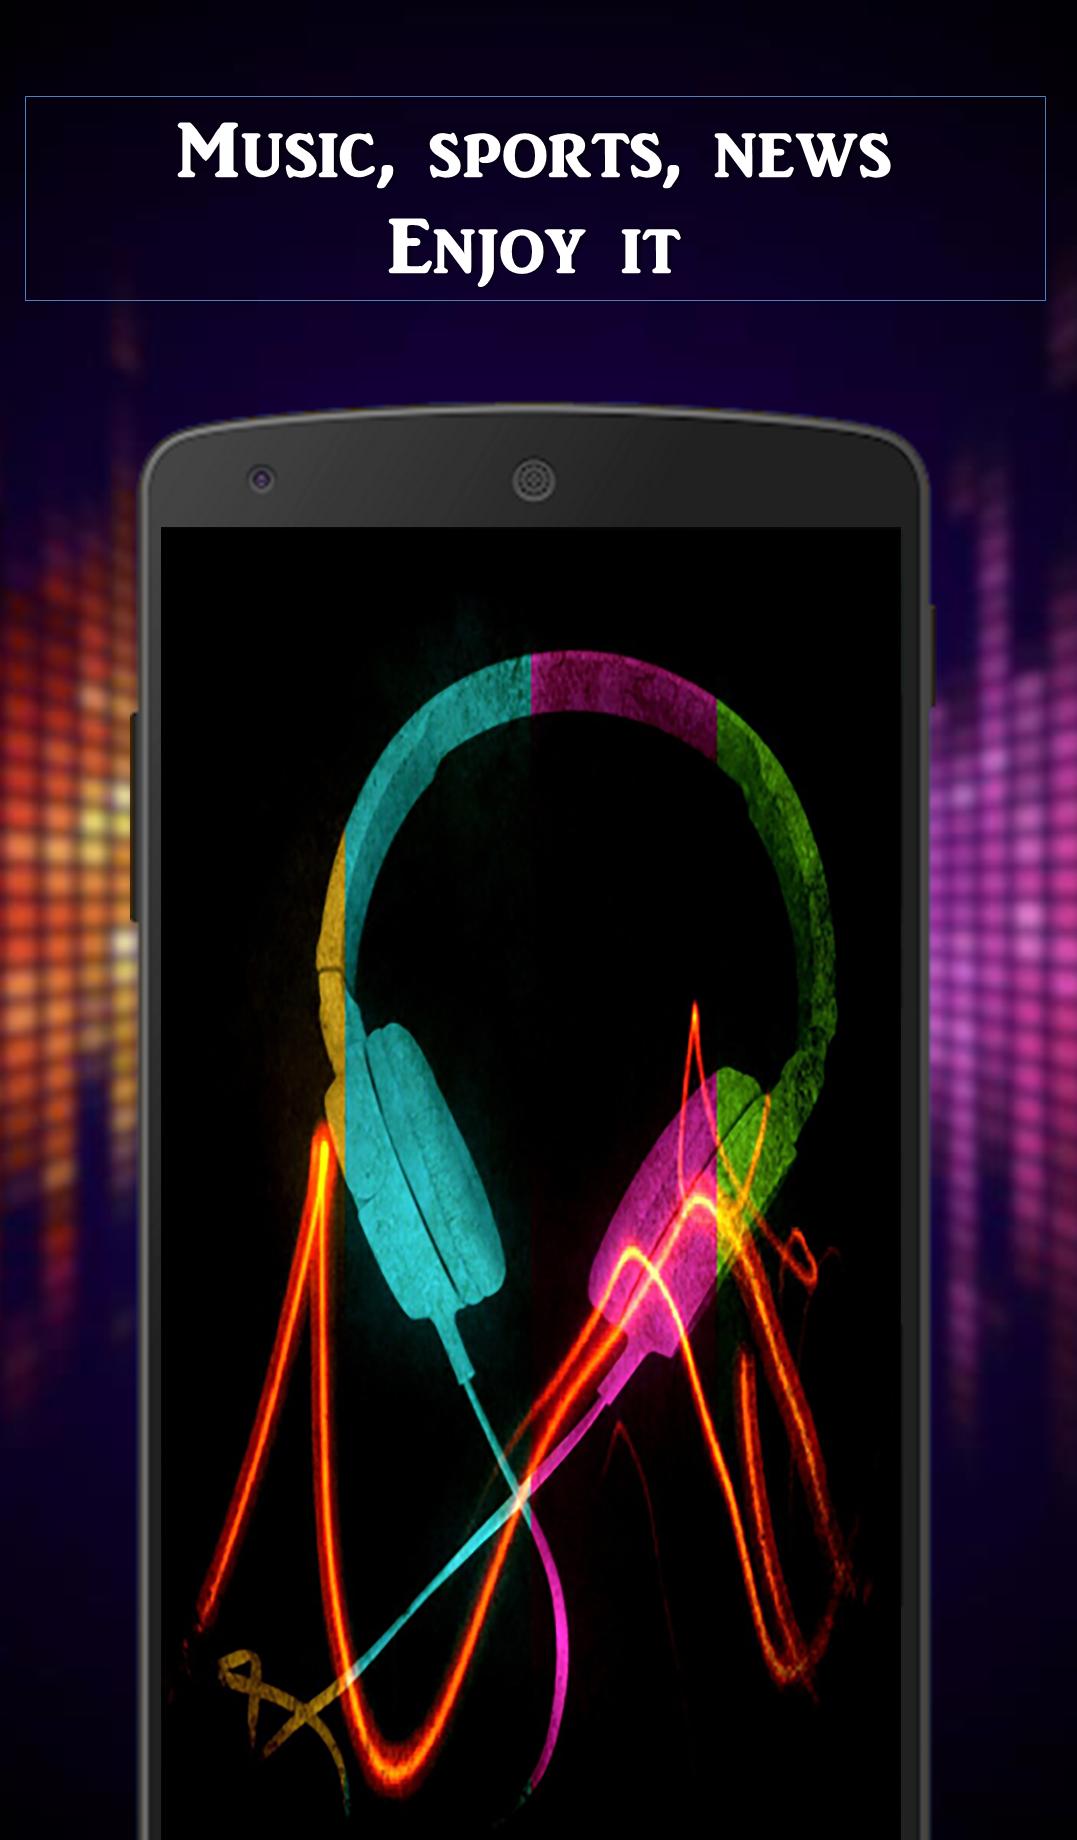 Radio Ritmo 95.7 for Android - APK Download